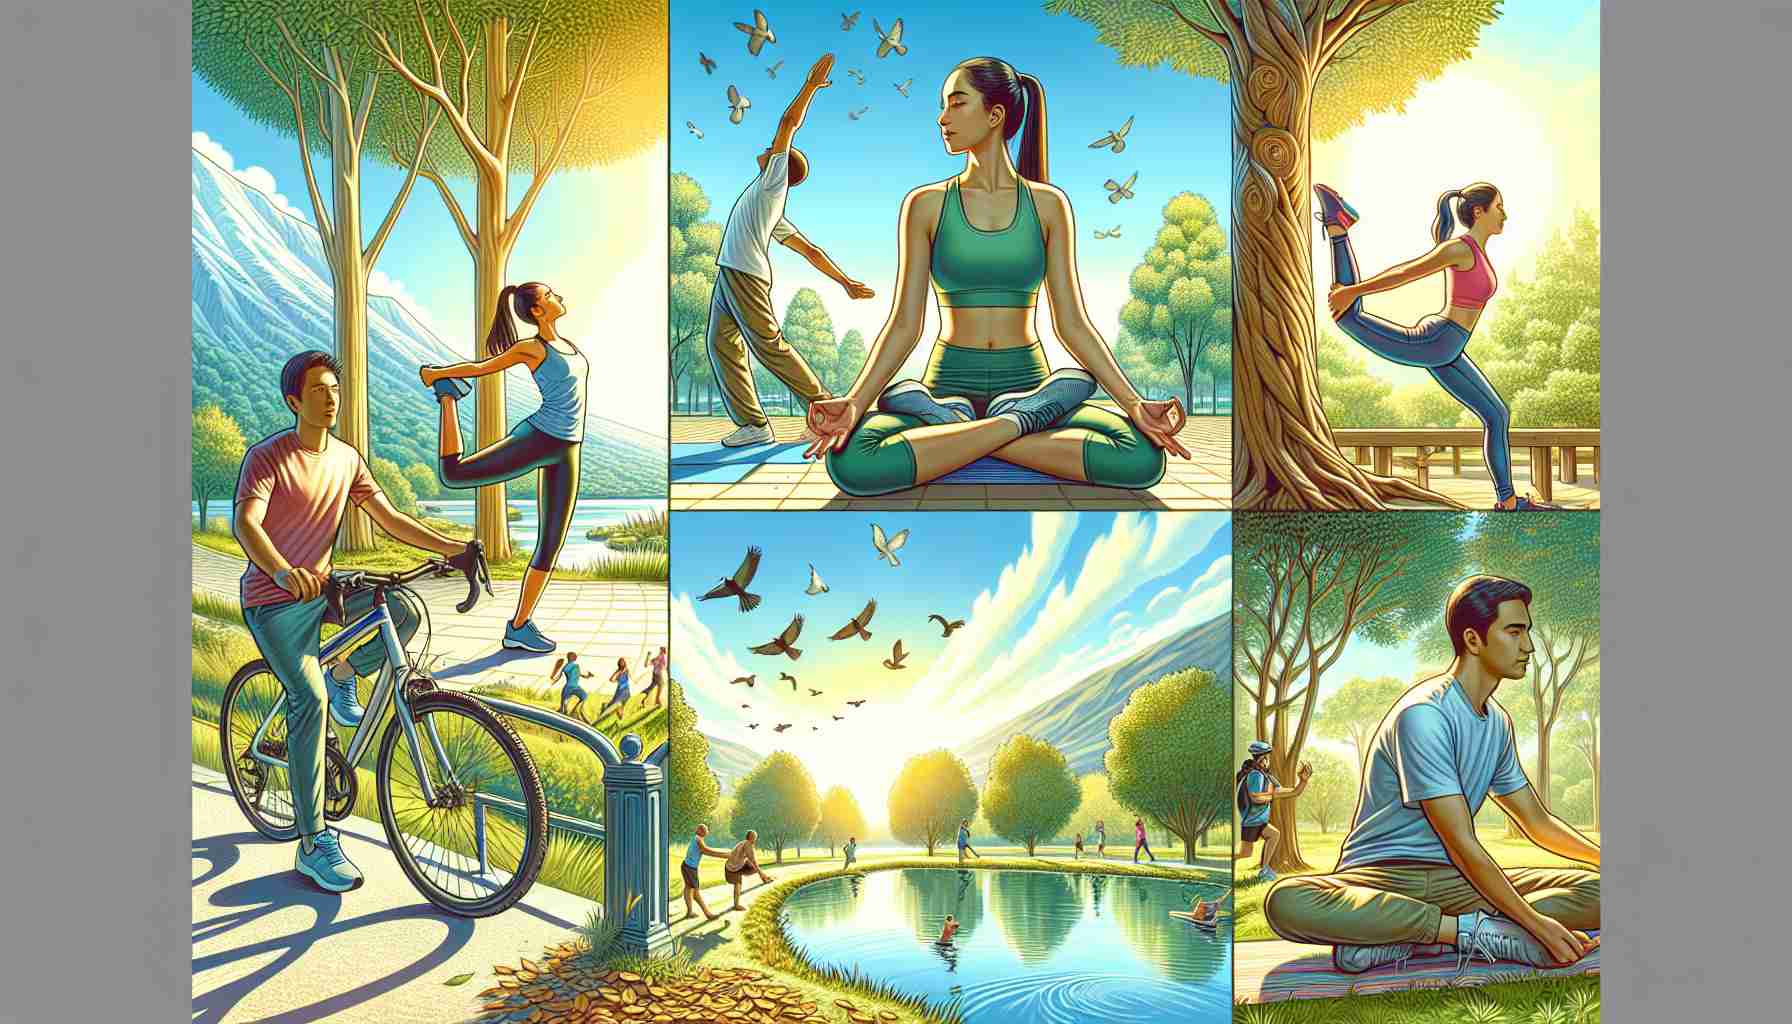 Detailed image of an outdoor exercise setting emphasizing relaxation and mental well-being. Include a diverse group of individuals: a Middle-Eastern female jogger, a Caucasian male doing yoga poses, a Hispanic female cyclist, and a South Asian male doing stretching exercises. The environment should be peaceful with trees, a pristine lake, bright blue sky, sunshine peering through the leaves of the trees, and the sound of leaved crunching under the jogging shoes could be perceived. Birds might be heard in the distant. Capture the atmosphere that enhances the mental well-being through outdoor exercise.